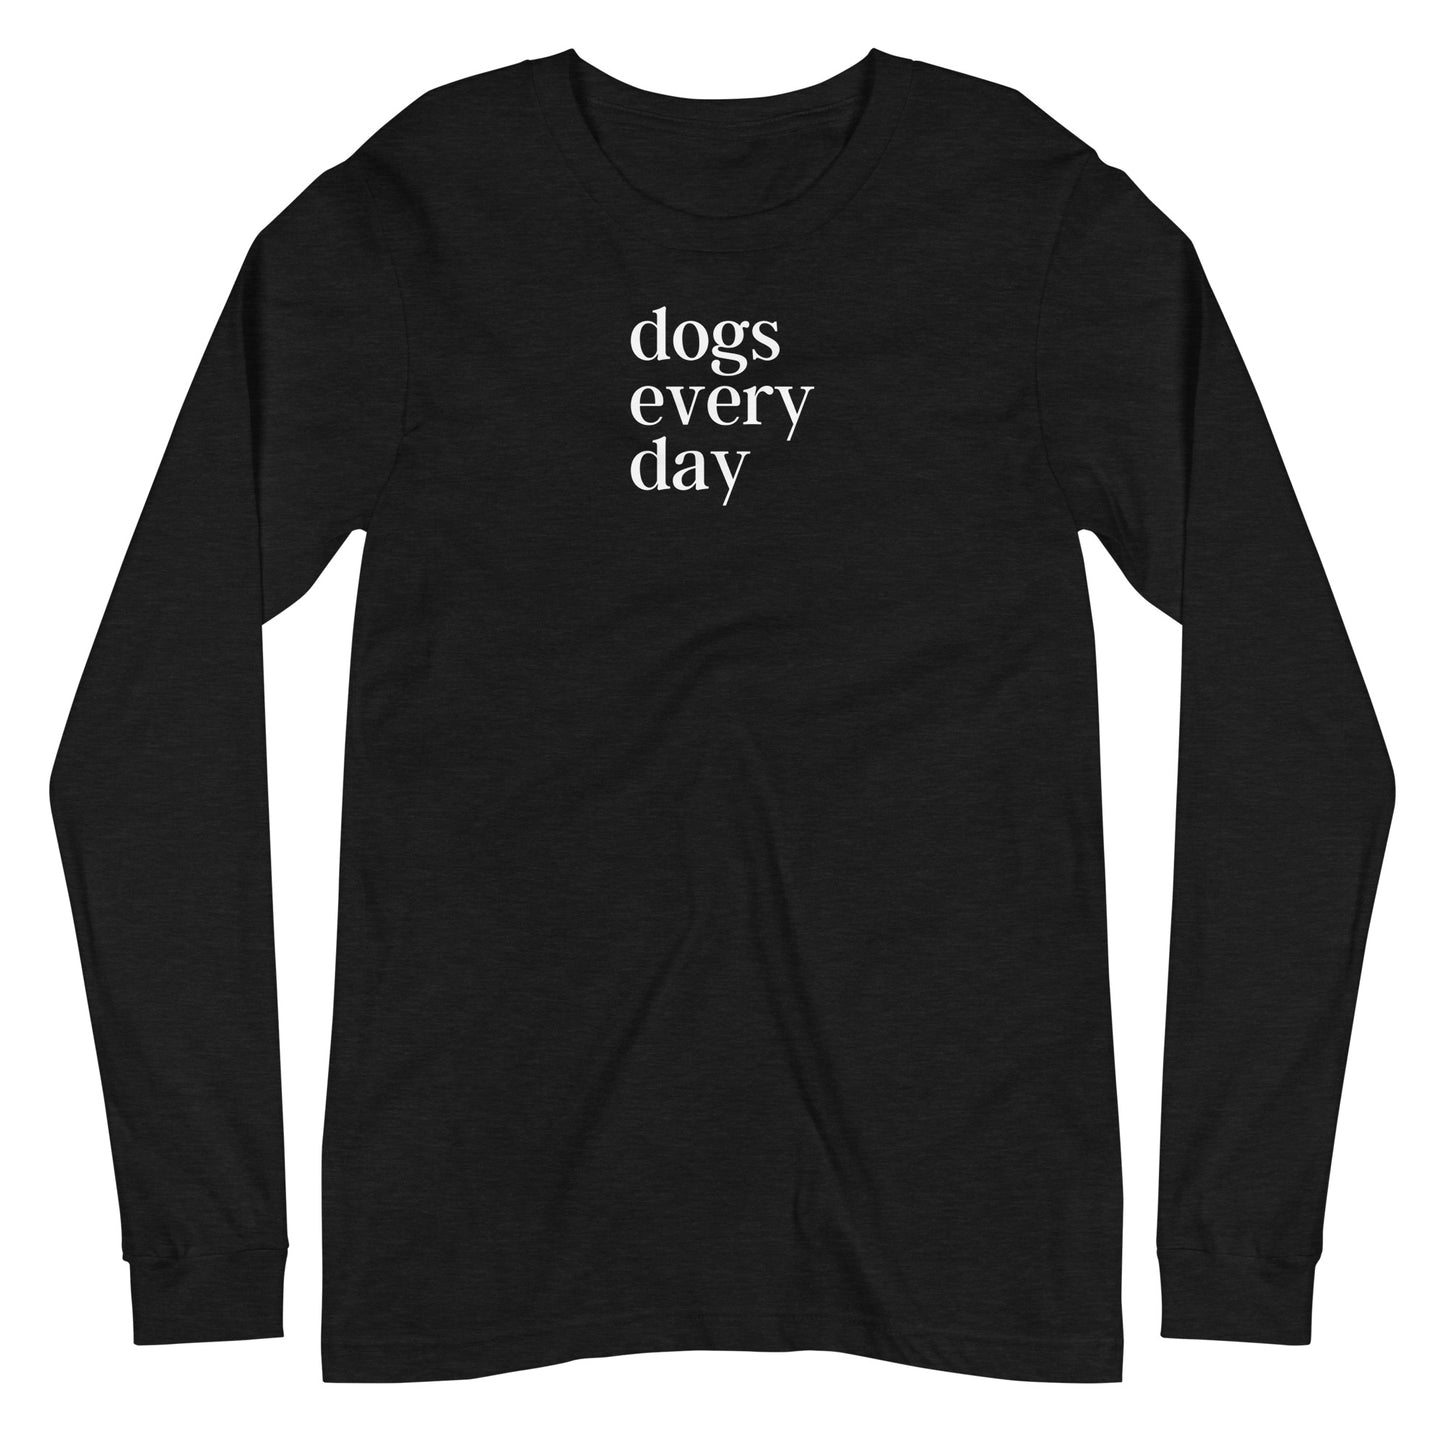 Dogs Every Day Long-sleeved T-shirt